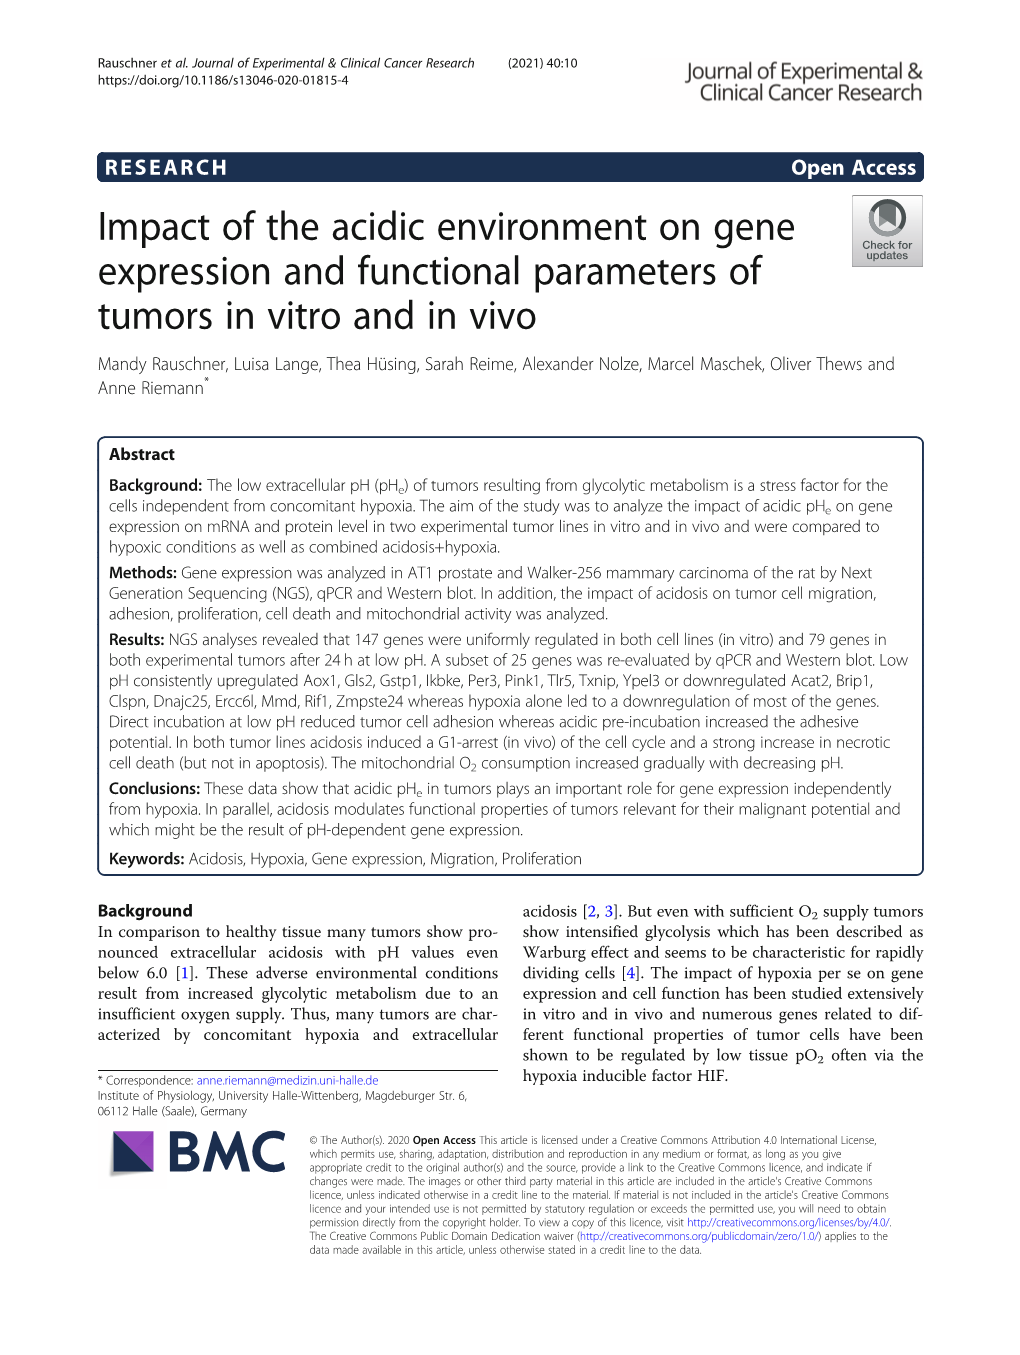 Impact of the Acidic Environment on Gene Expression and Functional Parameters of Tumors in Vitro and in Vivo